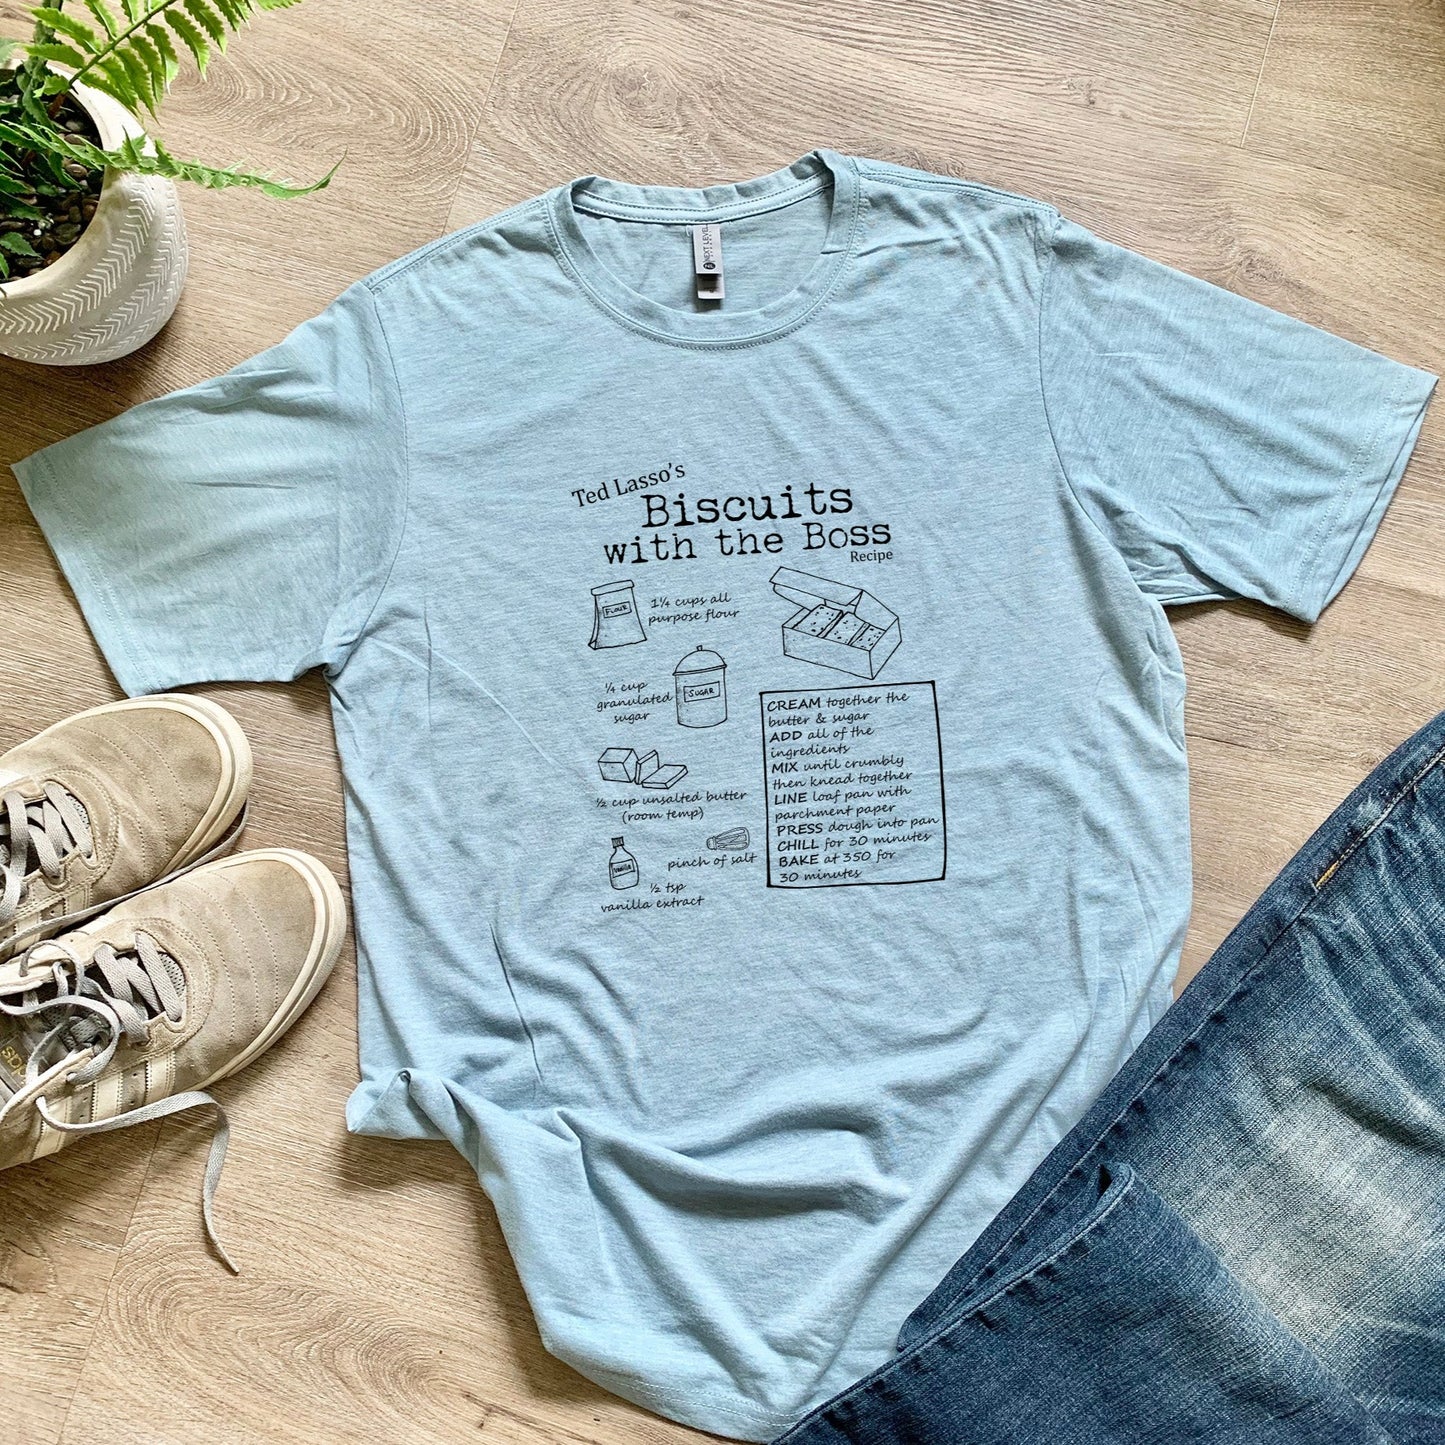 Biscuits With The Boss (Ted Lasso) - Men's / Unisex Tee - Stonewash Blue or Sage